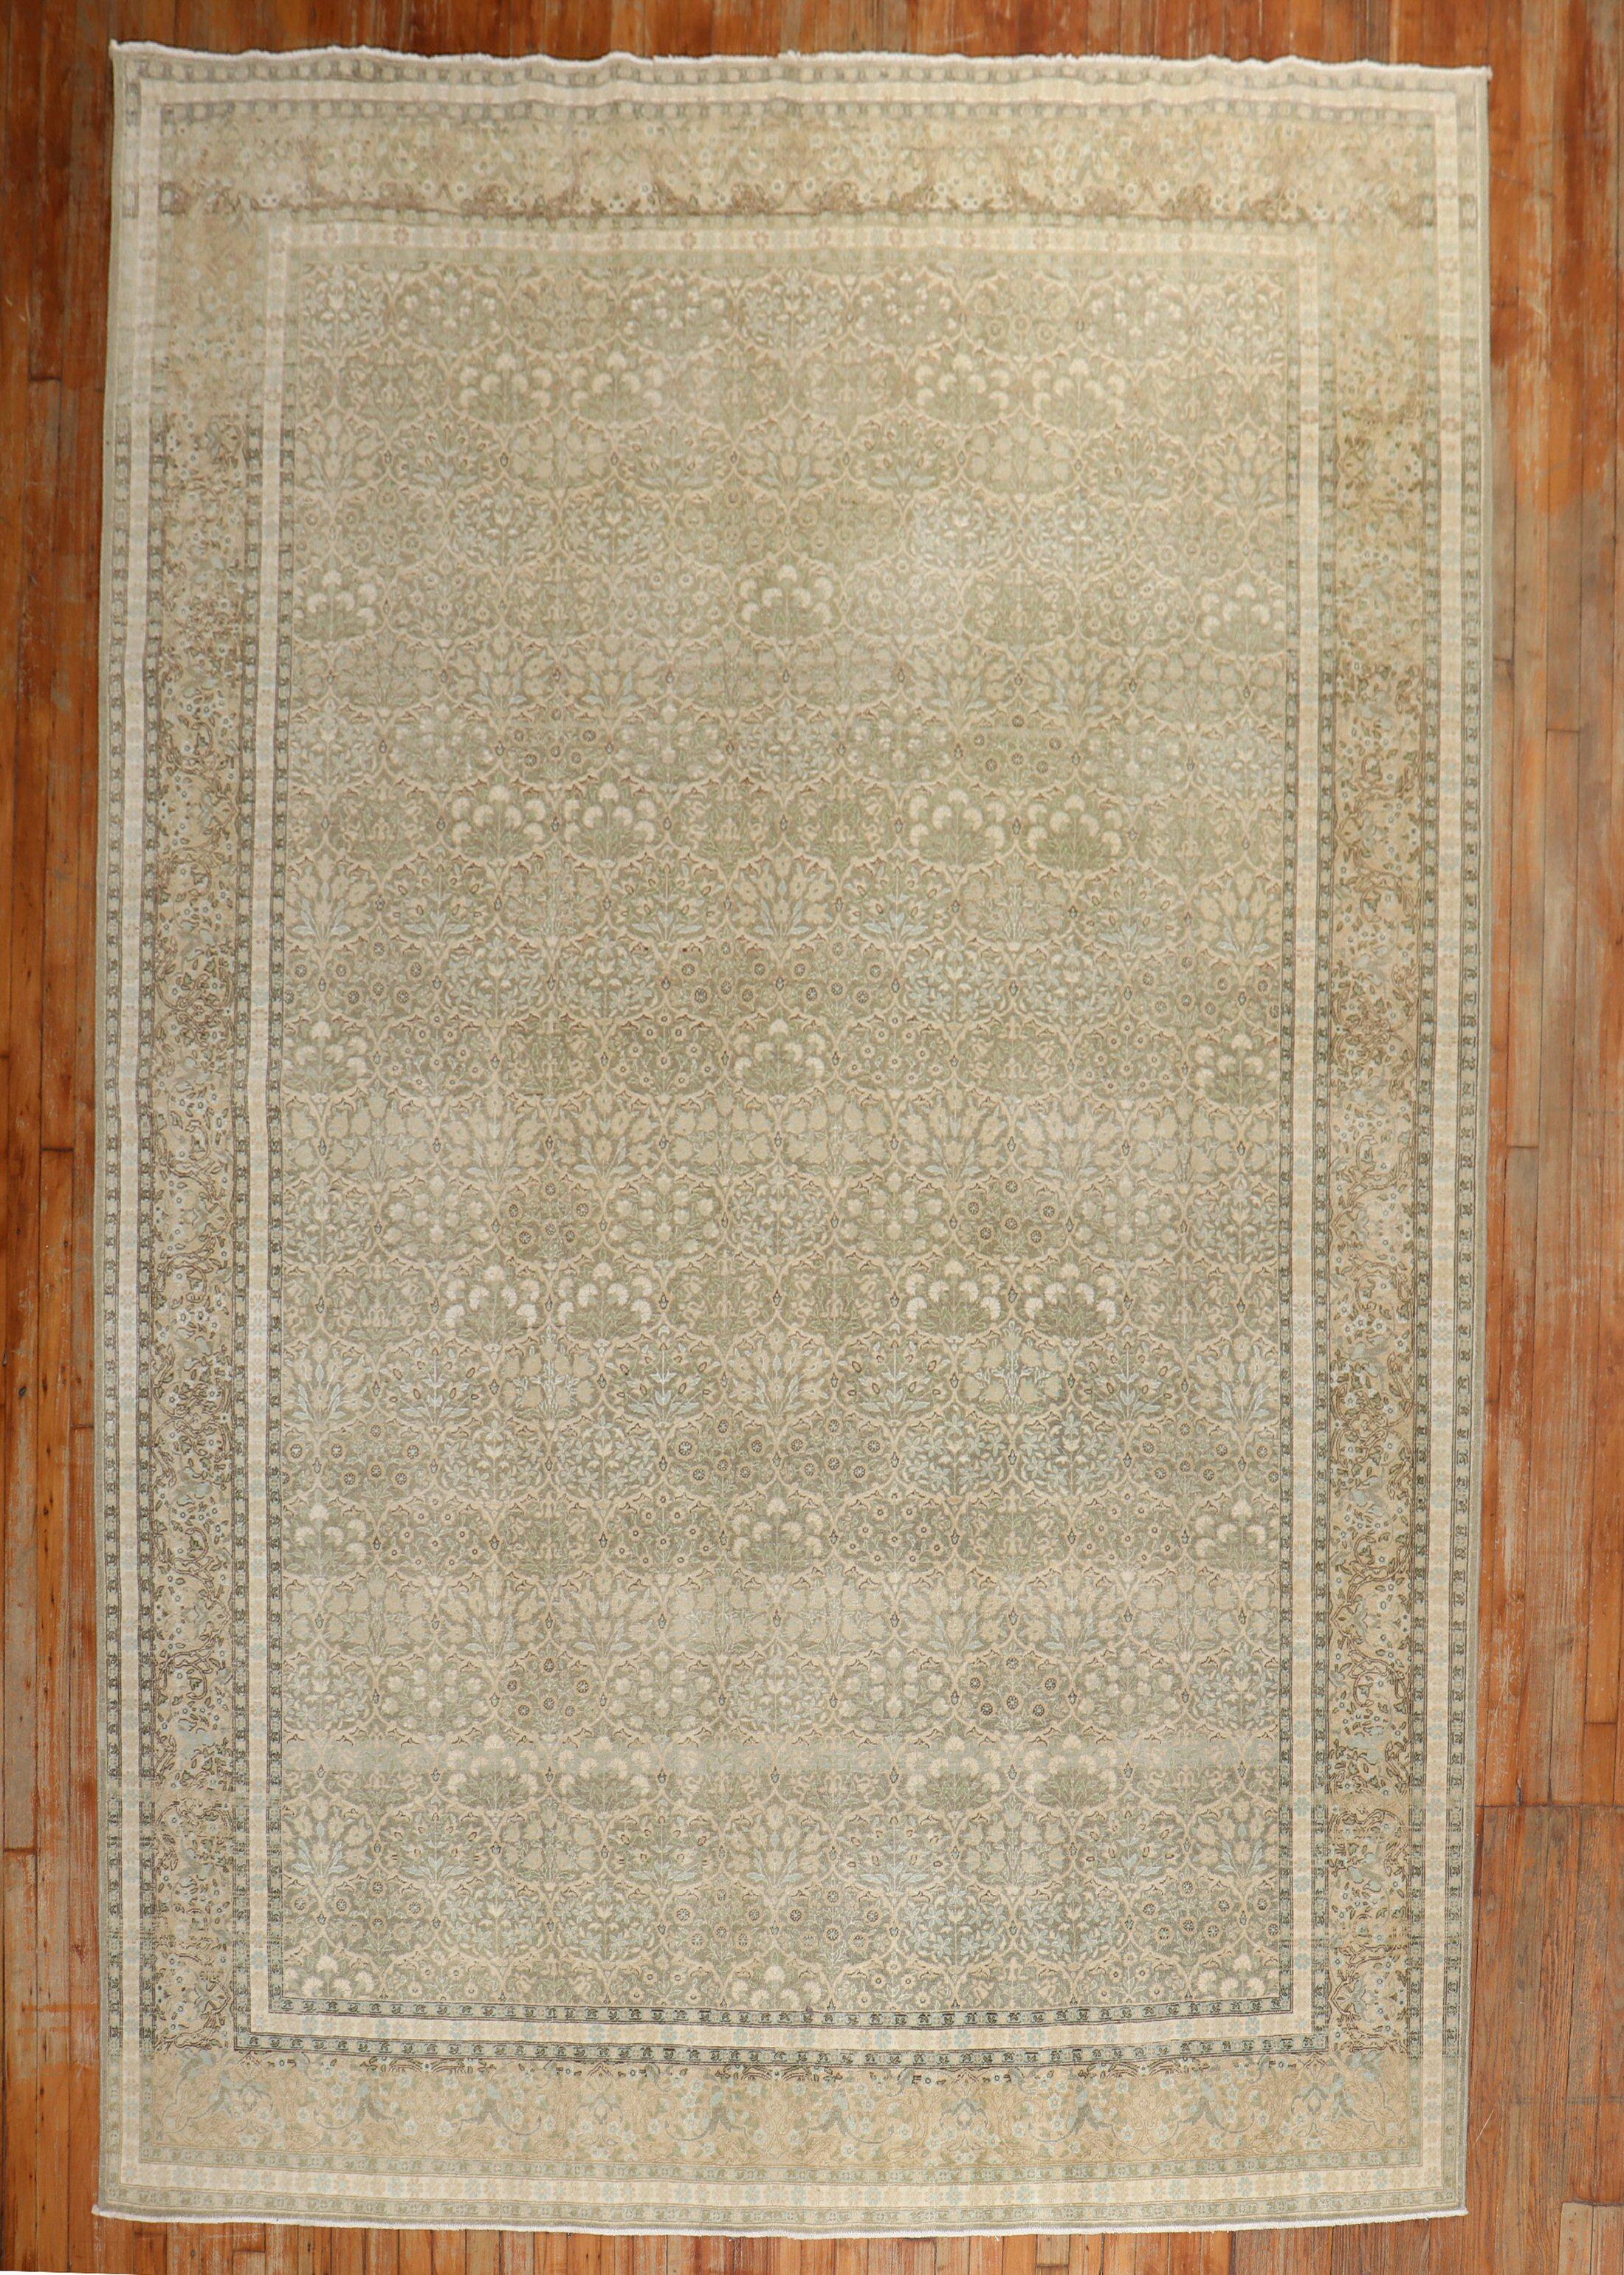 A mid 20th century Persian Tabriz  floral pattern rug in neutral tones

Measures: 7'10'' x 11'3''.